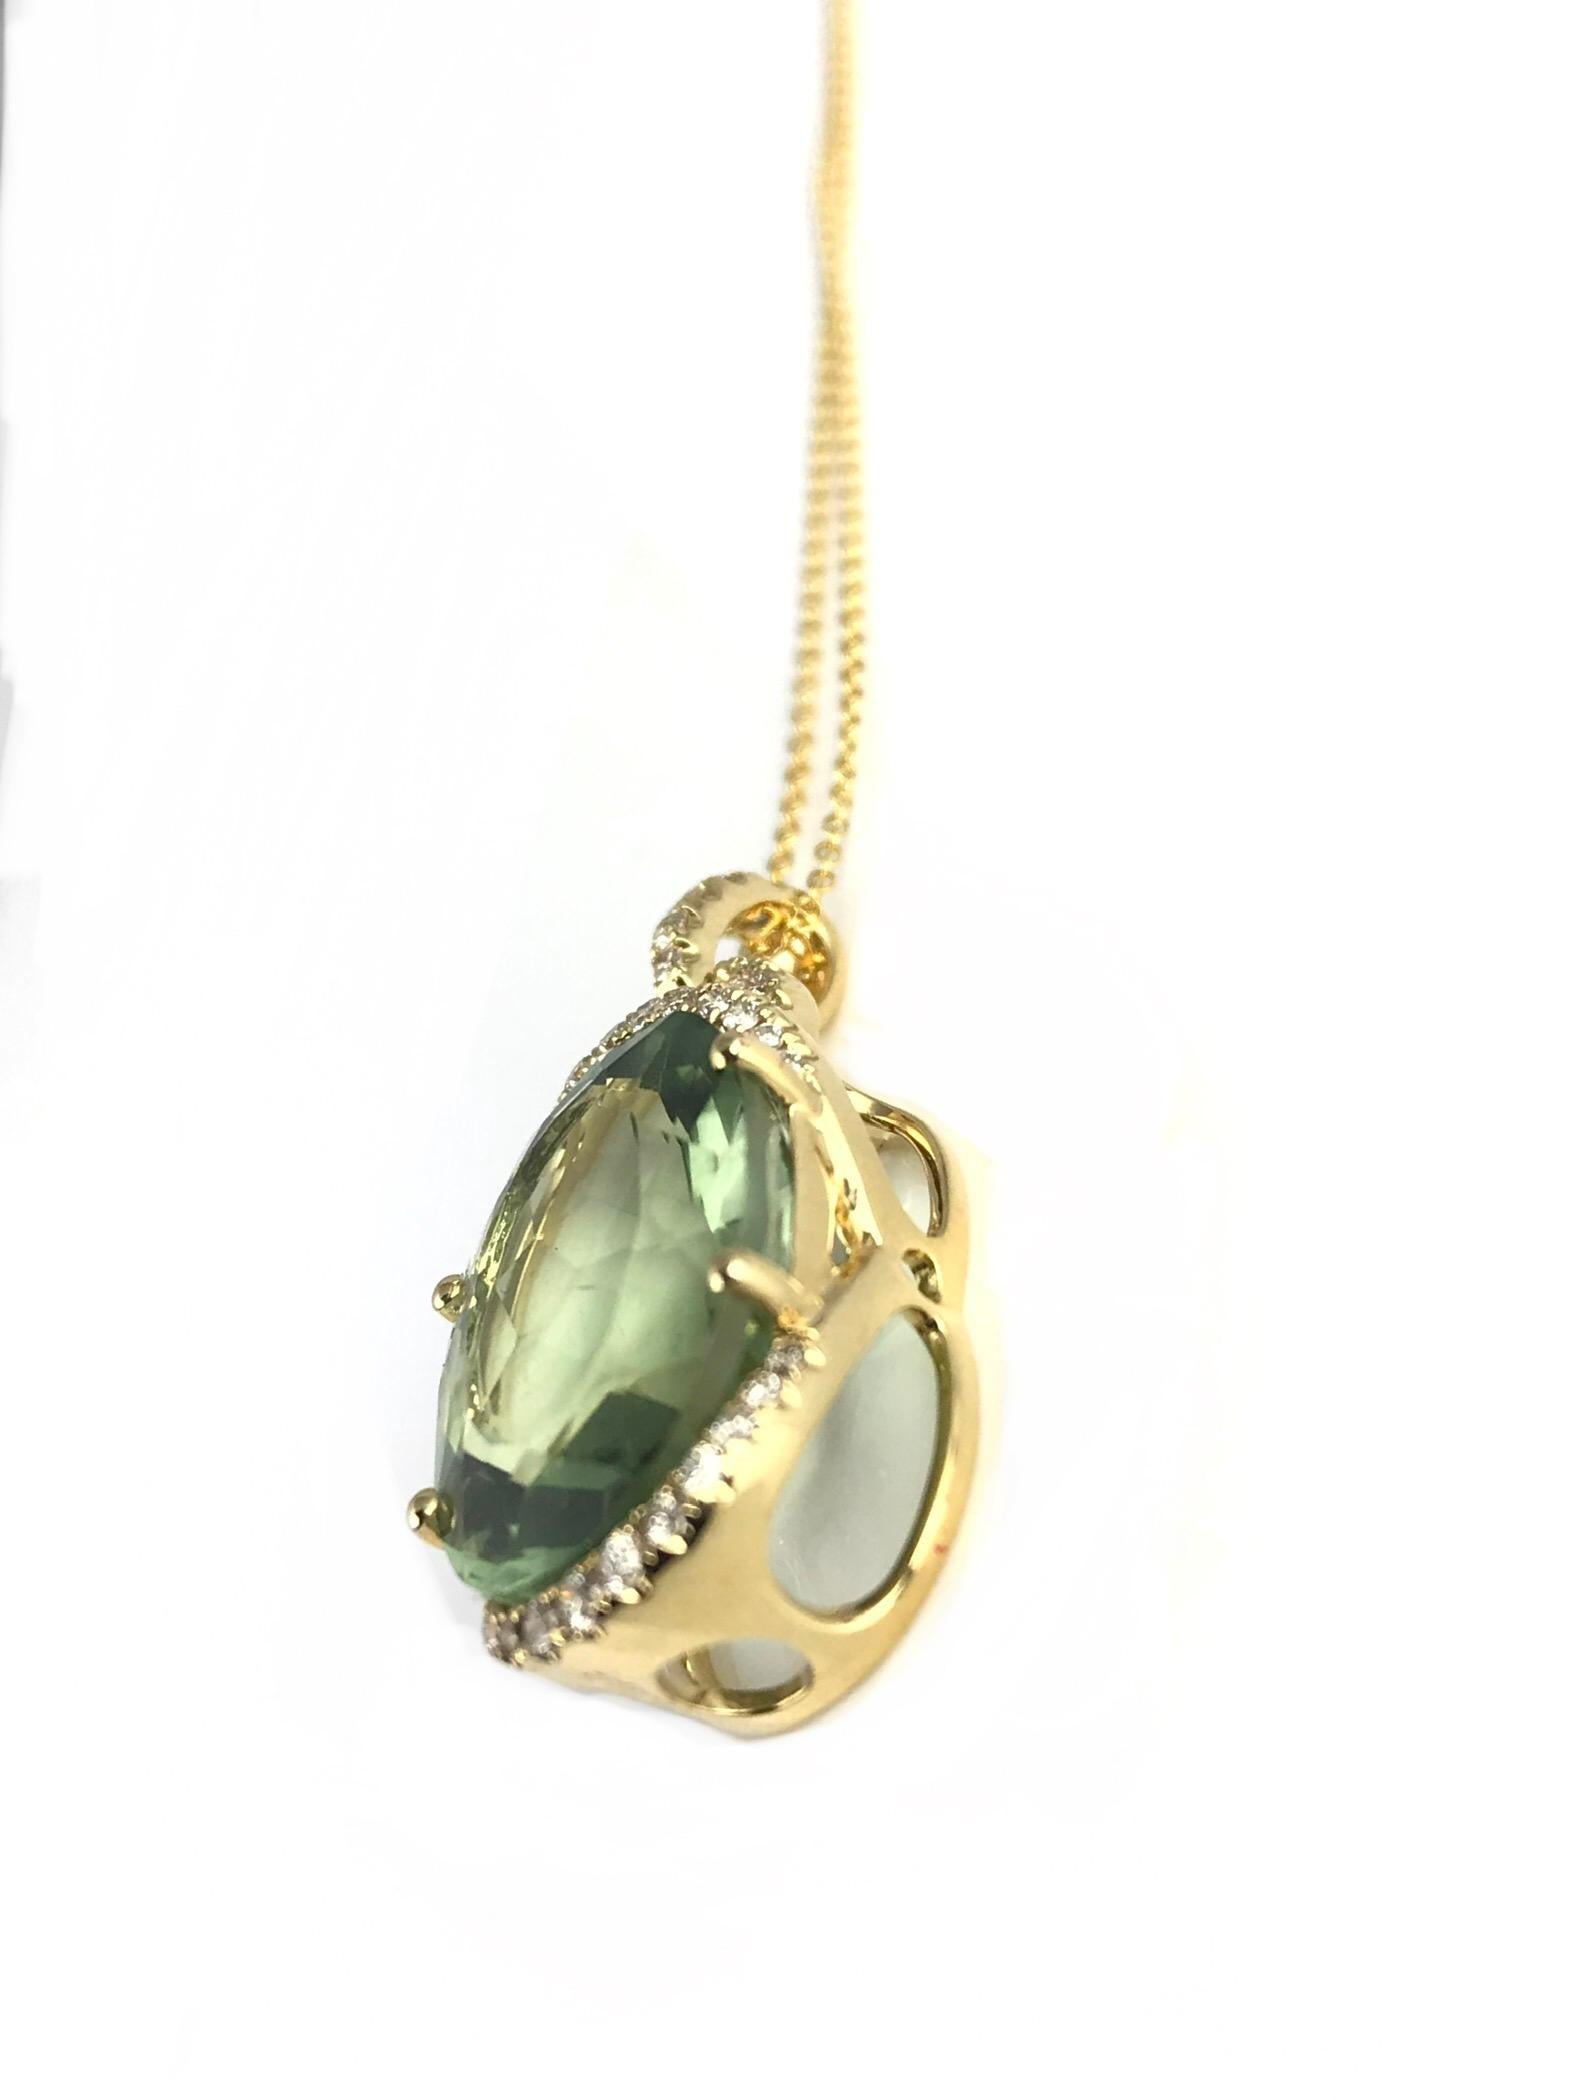 (DiamondTown) This beautiful pendant features a 10.63 carat oval cut exotic green amethyst center, decorated at top and bottom by a curve of round white diamonds. Additional diamonds on the bail bring the total diamond weight to 0.36 carats.

Item